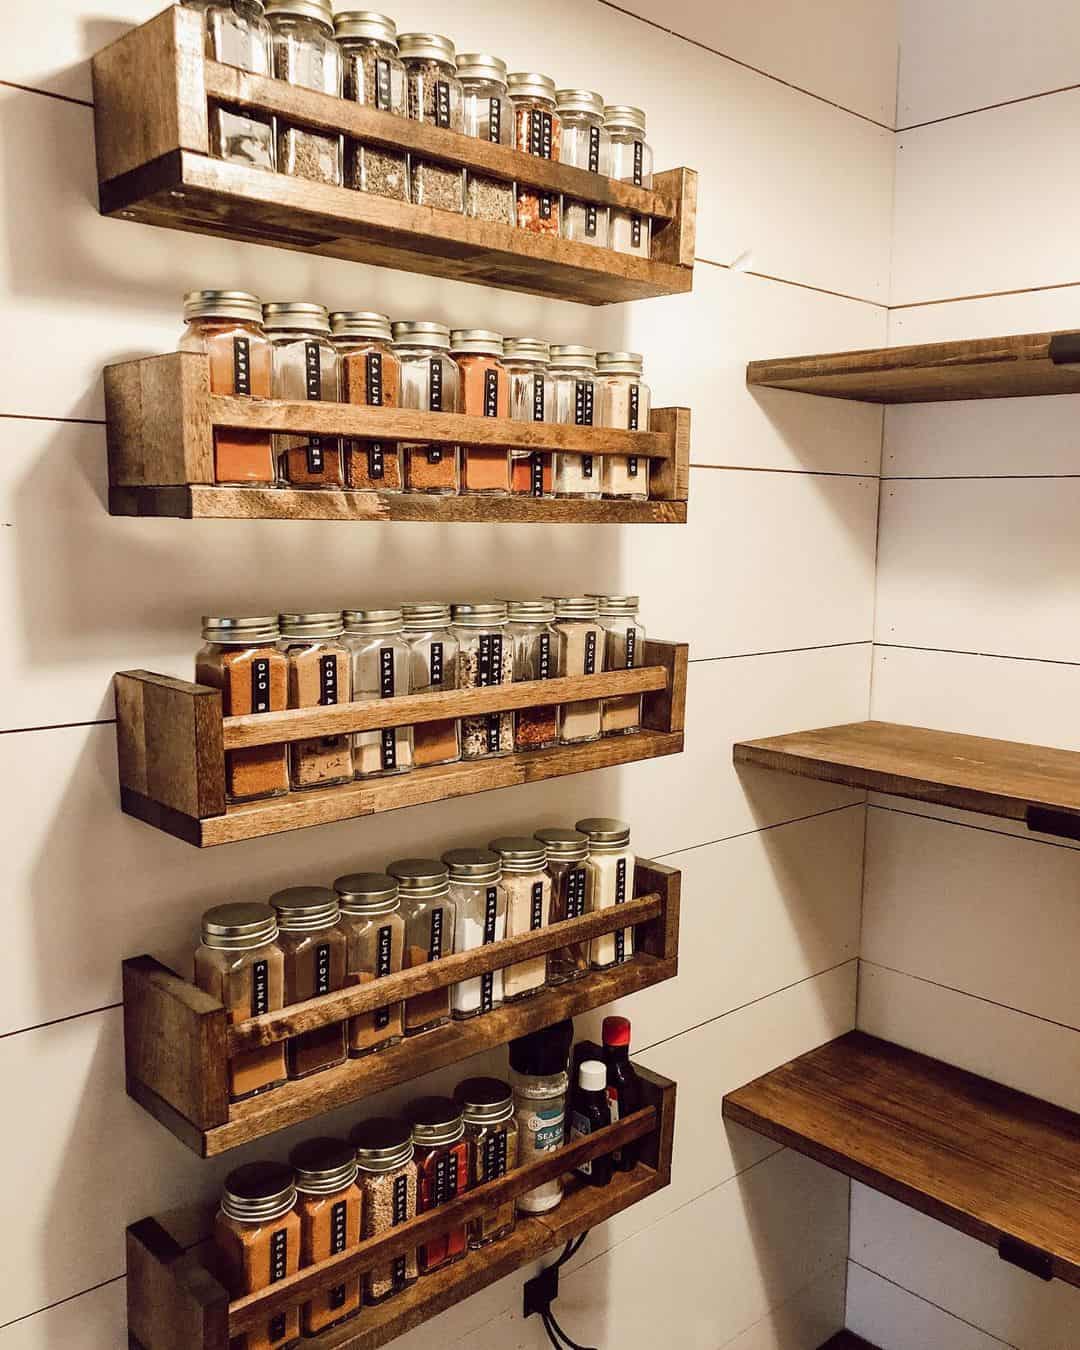 https://www.soulandlane.com/wp-content/uploads/2022/05/Stained-Wood-Spice-Rack-with-Spices.jpg